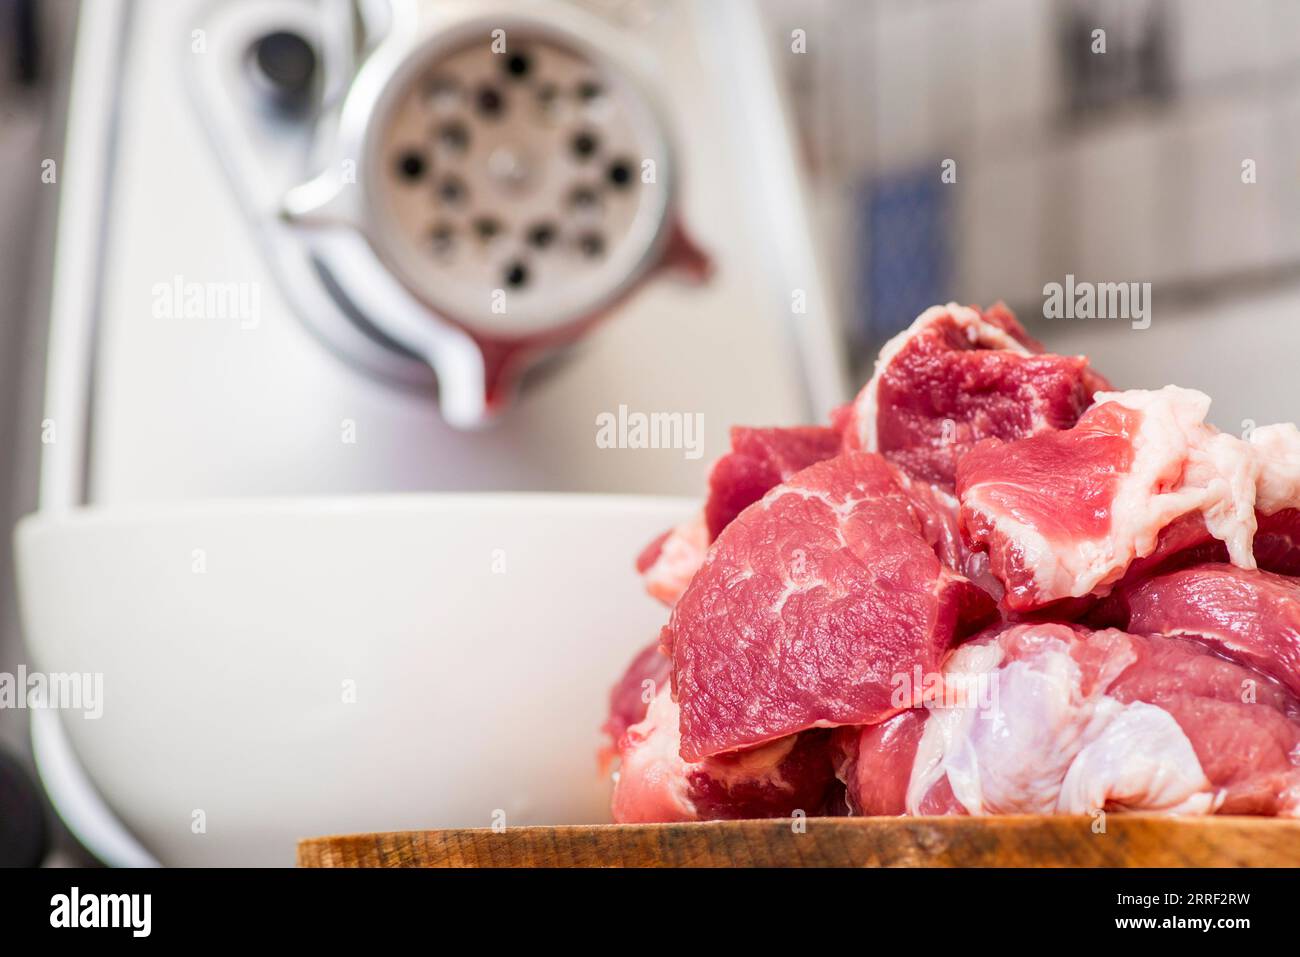 https://c8.alamy.com/comp/2RRF2RW/meat-grinder-with-fresh-meat-on-a-cutting-board-in-kitchen-interior-2RRF2RW.jpg